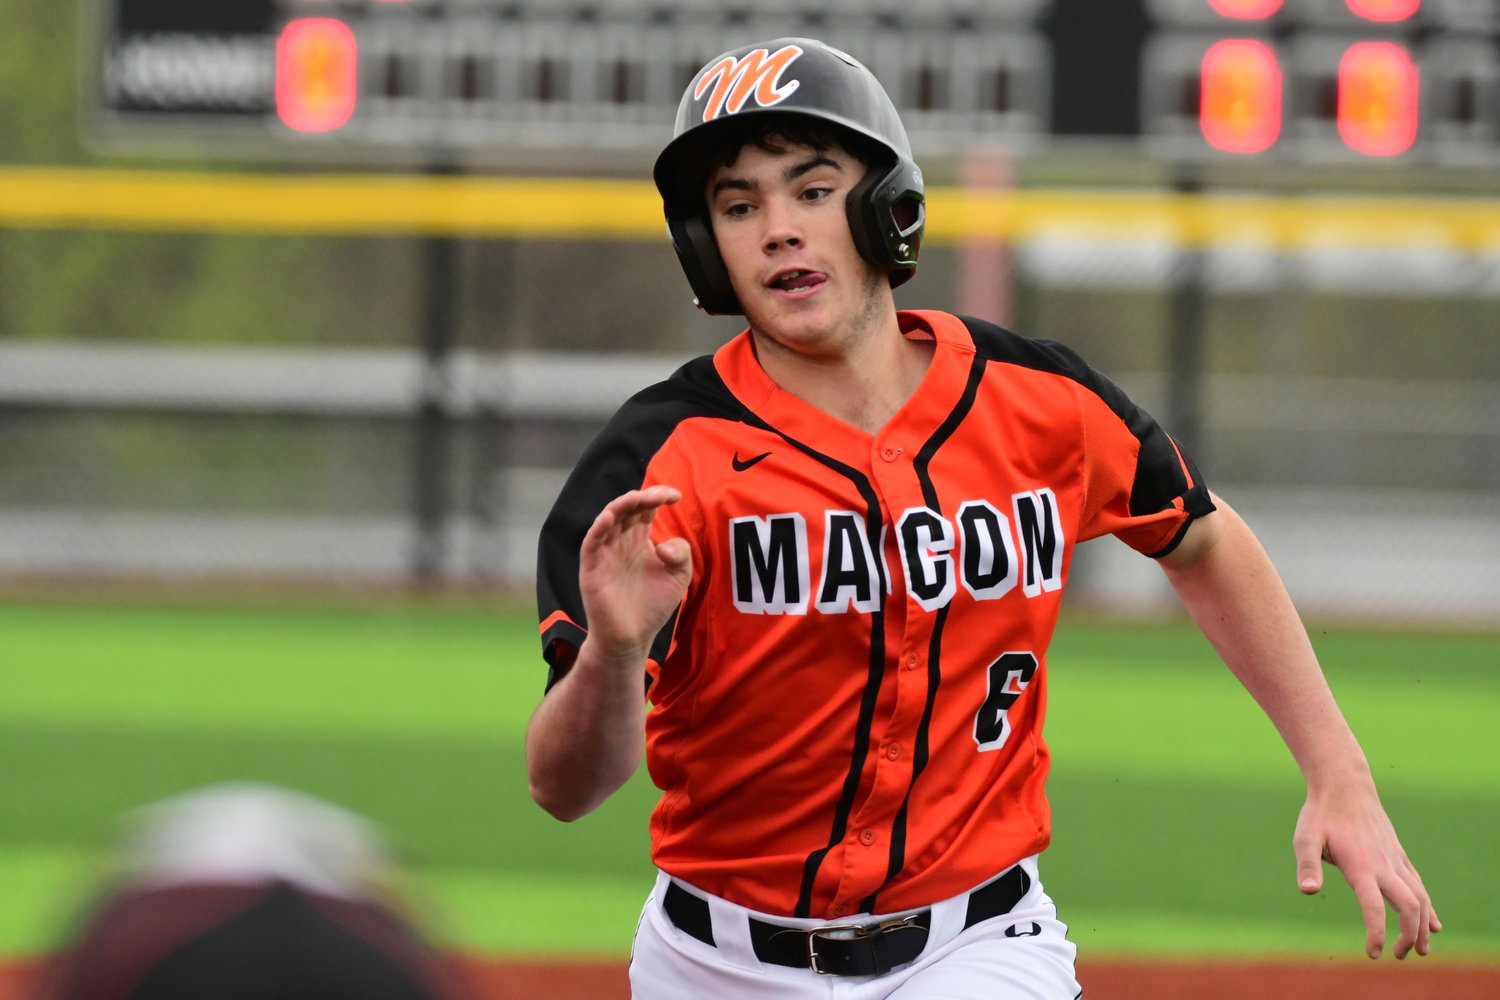 Photos from a 2-0 win for Macon against Putnam County on Friday, April 29, 2022. It was the first game at Macon's new turf field.